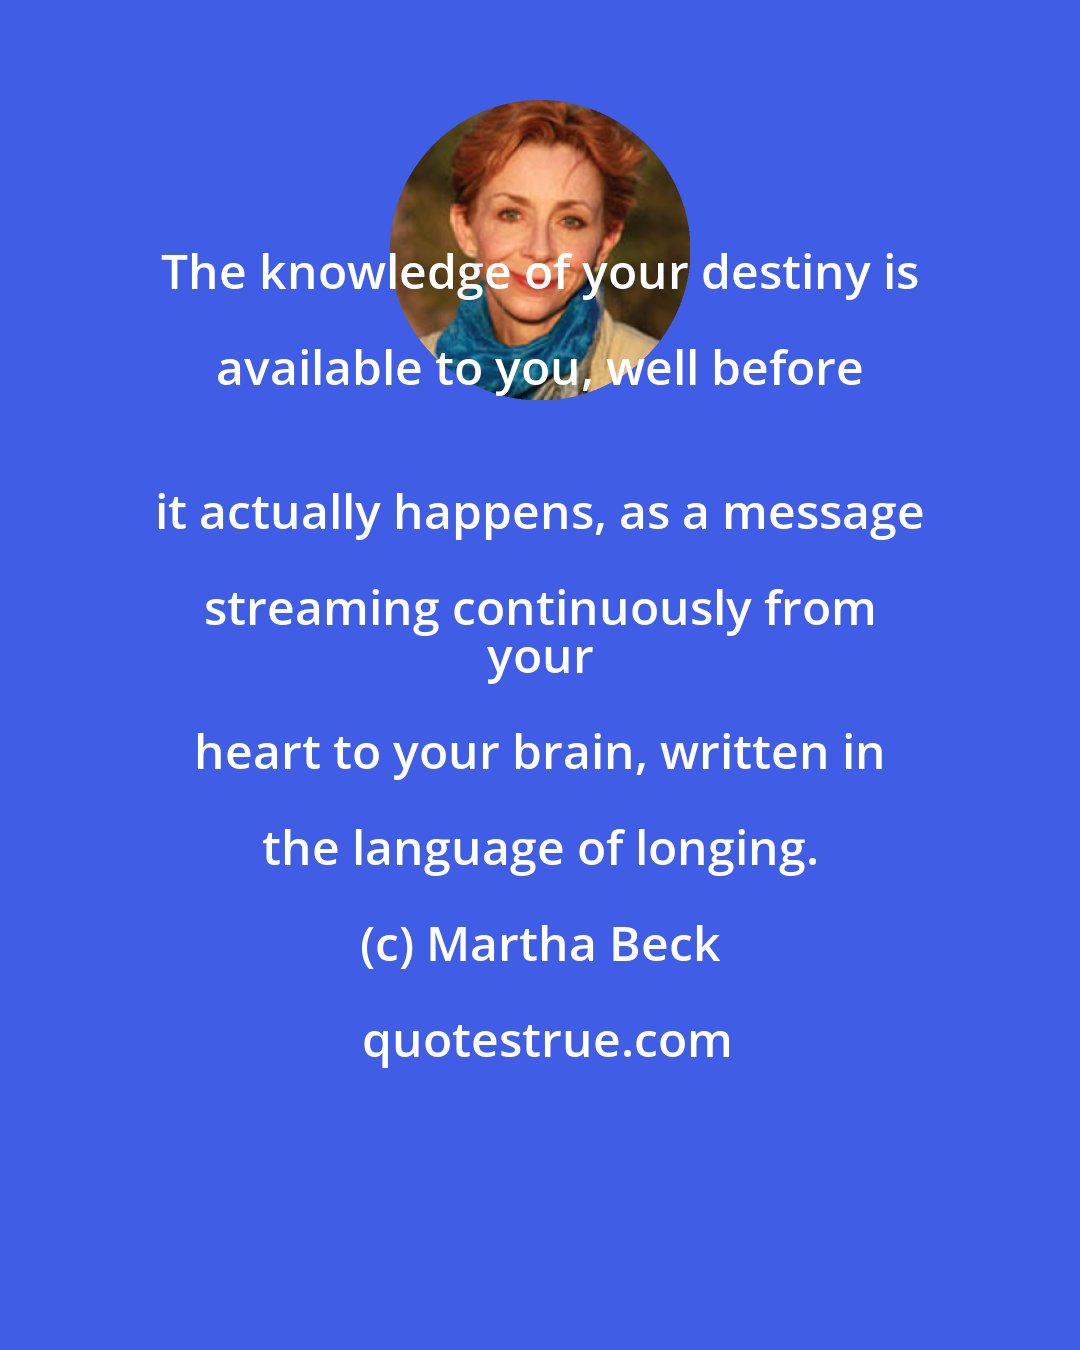 Martha Beck: The knowledge of your destiny is available to you, well before 
 it actually happens, as a message streaming continuously from 
 your heart to your brain, written in the language of longing.